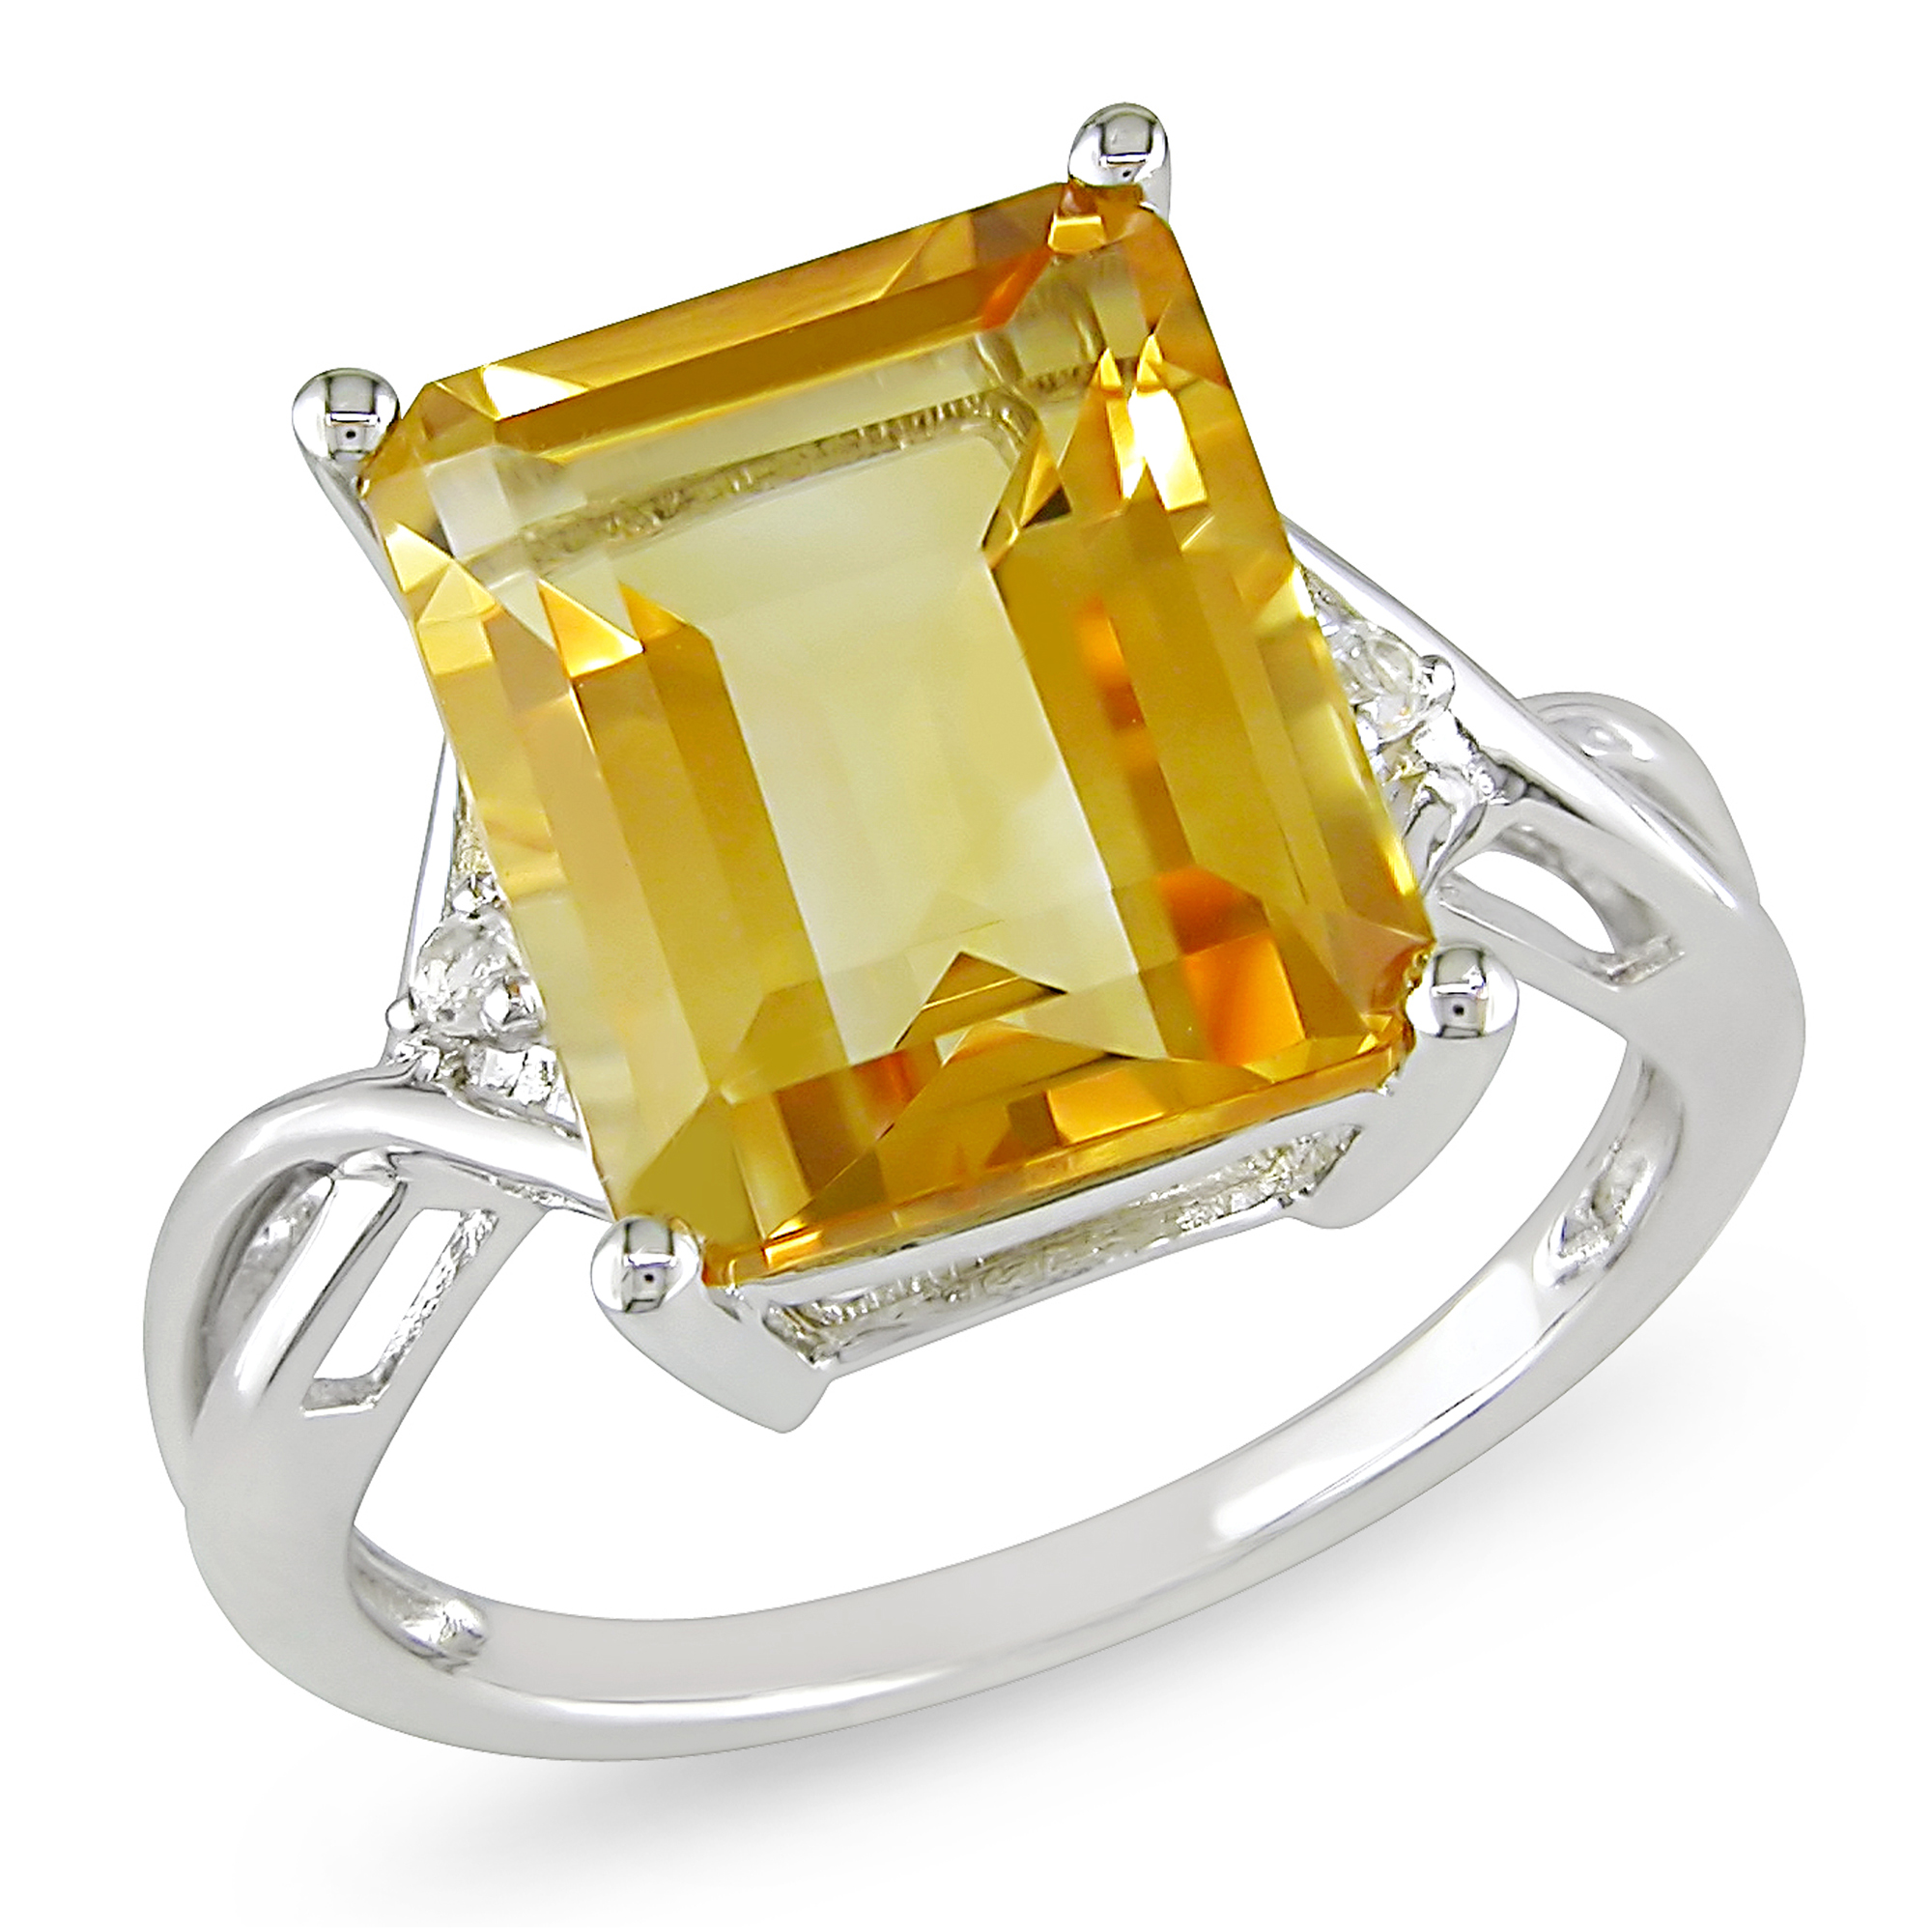 Amour 6 5/8 Carat T.G.W. Citrine White Topaz Fashion Ring in Sterling Silver